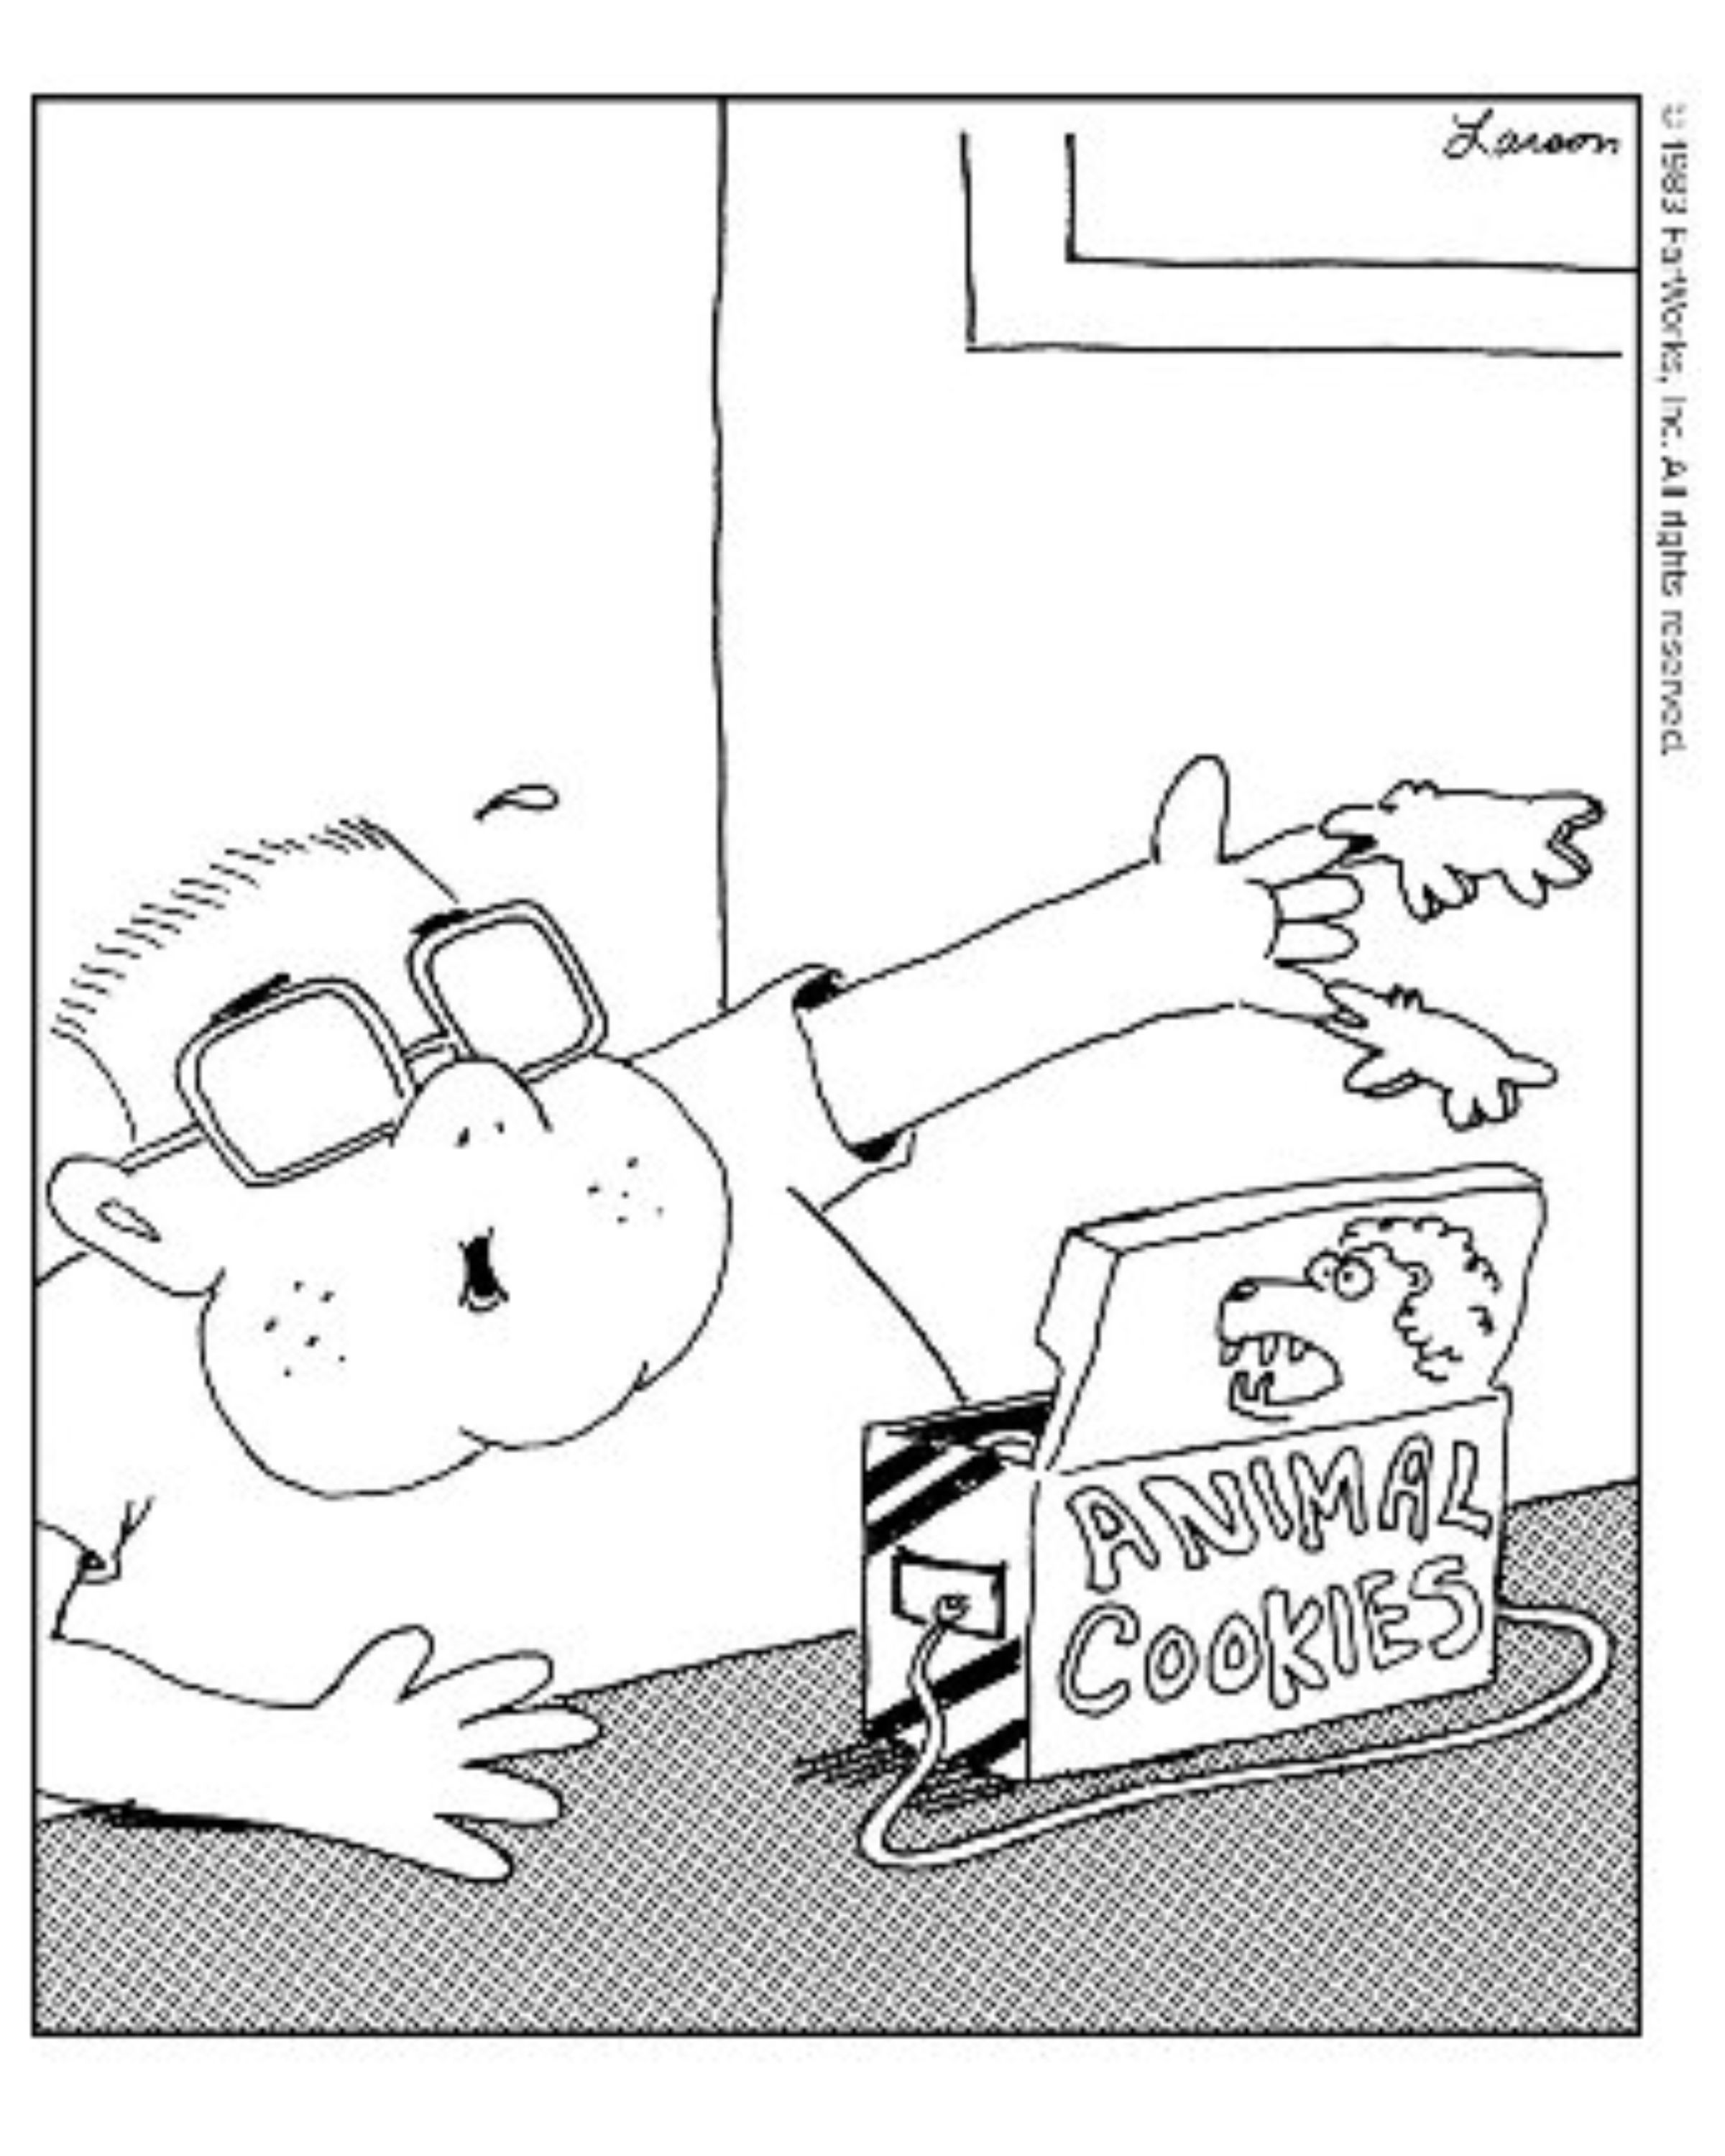 A kid getting bit by animal characters in The Far Side.